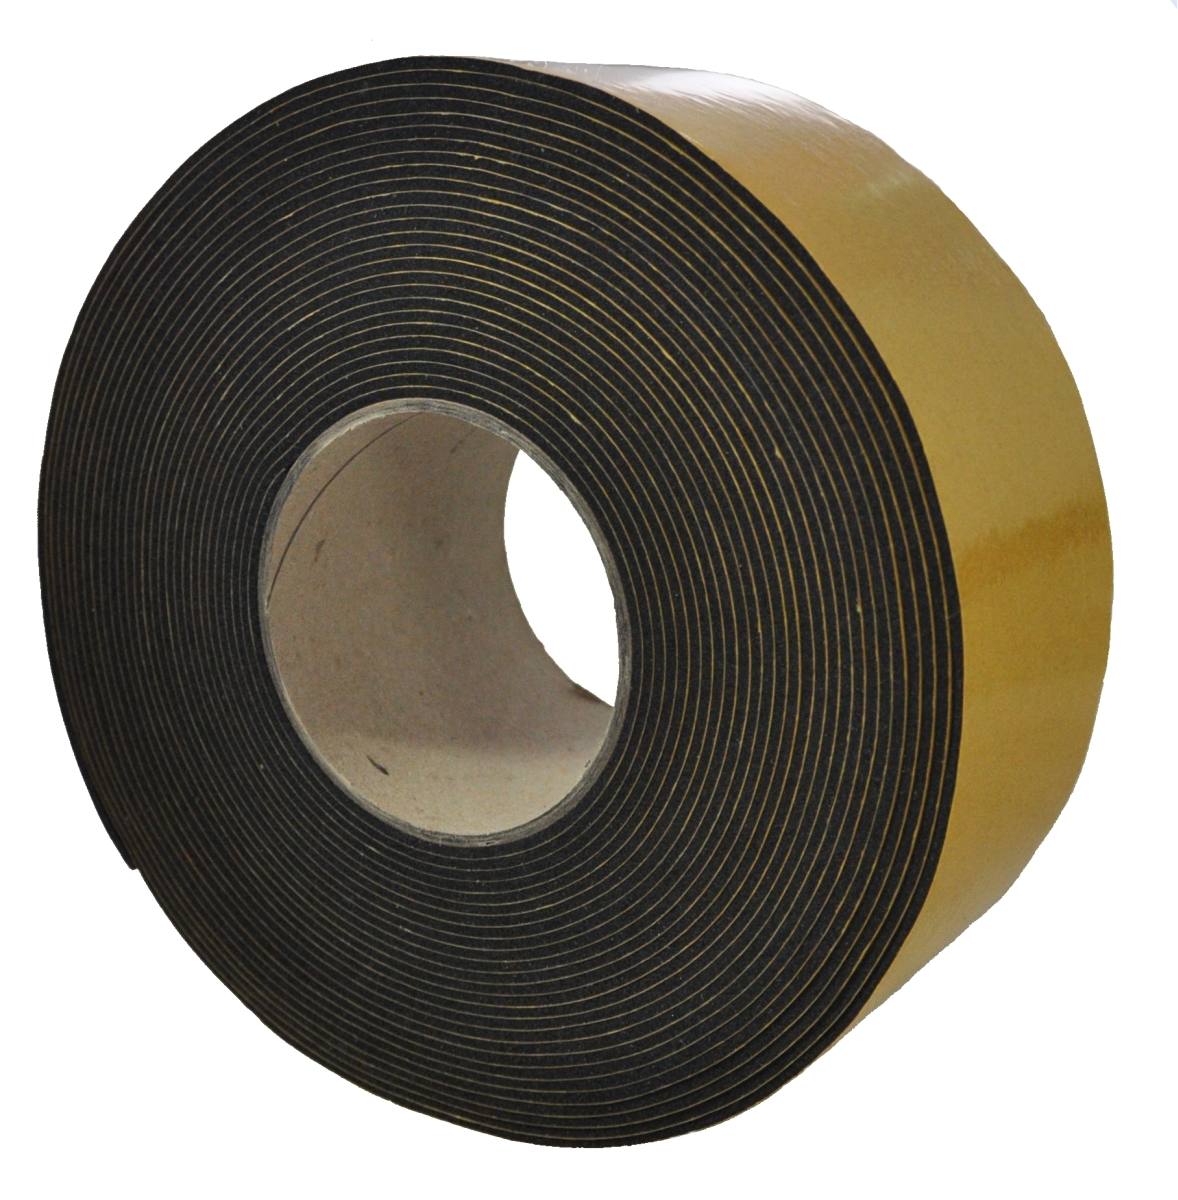 S-K-S EPDM 1mmx19mmx10m black self-adhesive on one side